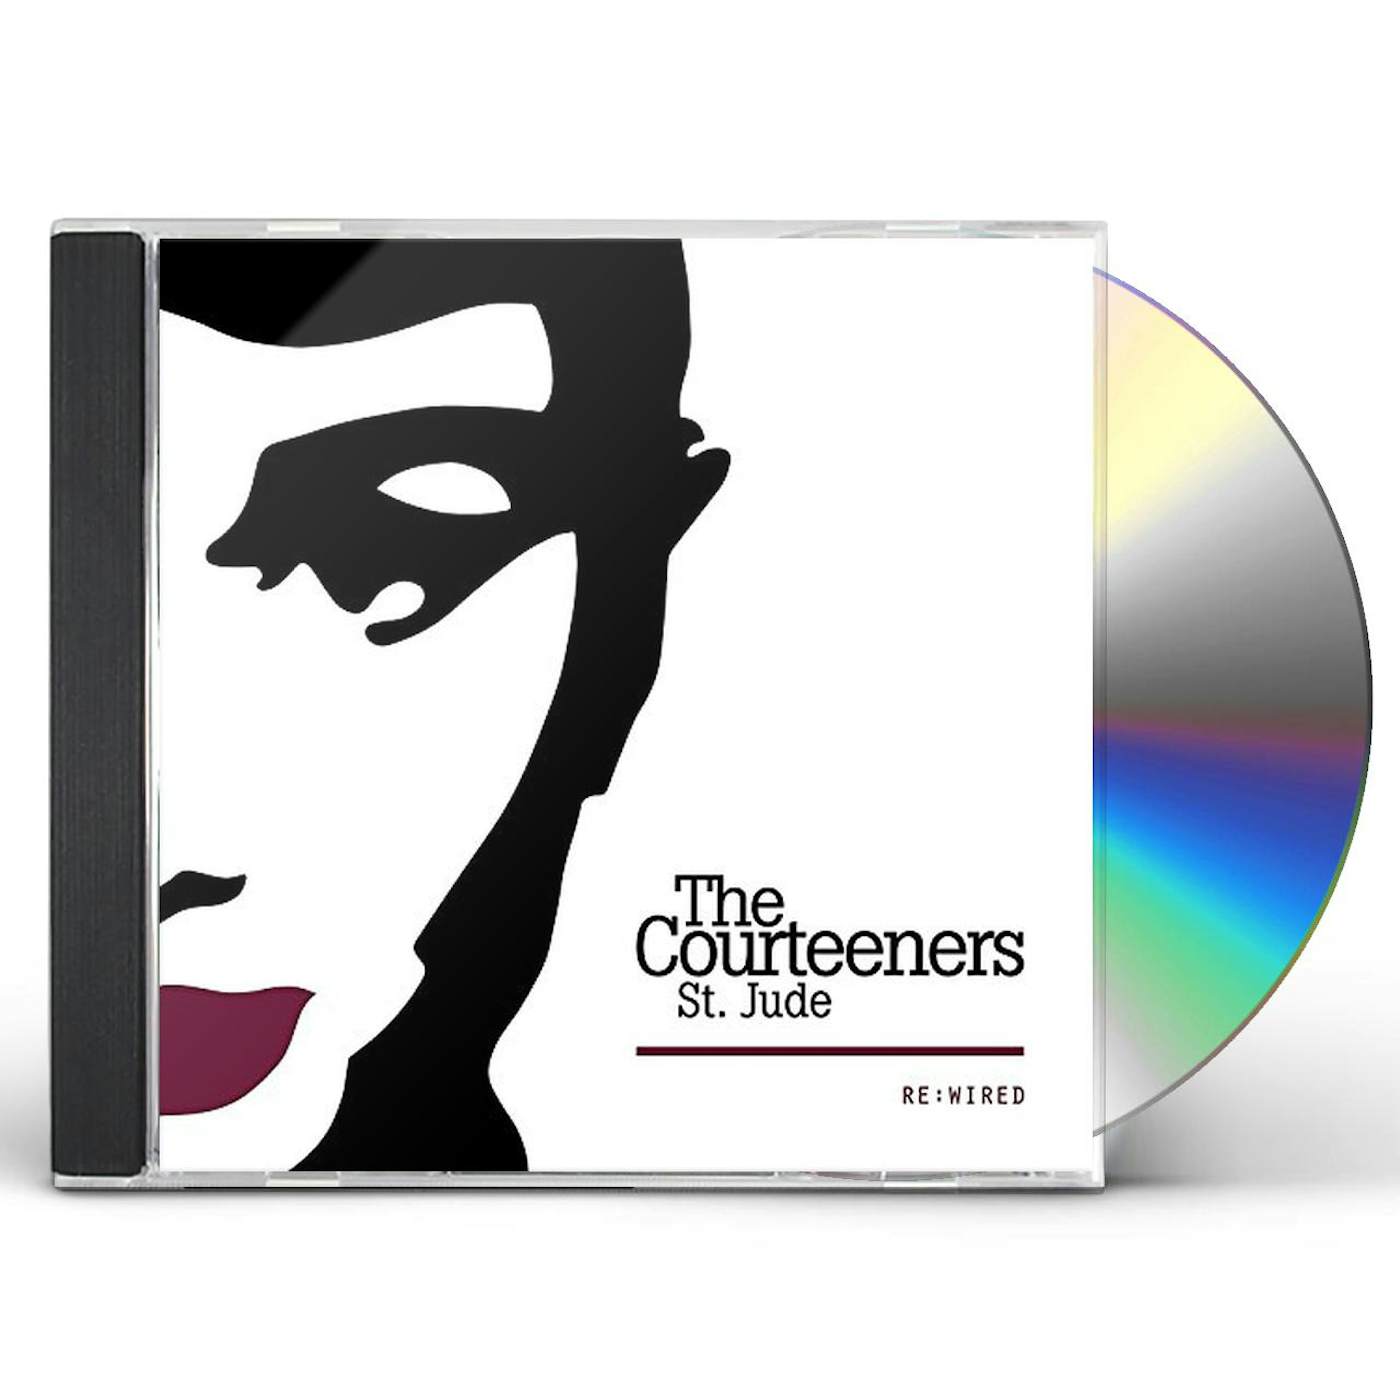 Courteeners ST JUDE RE:WIRED CD